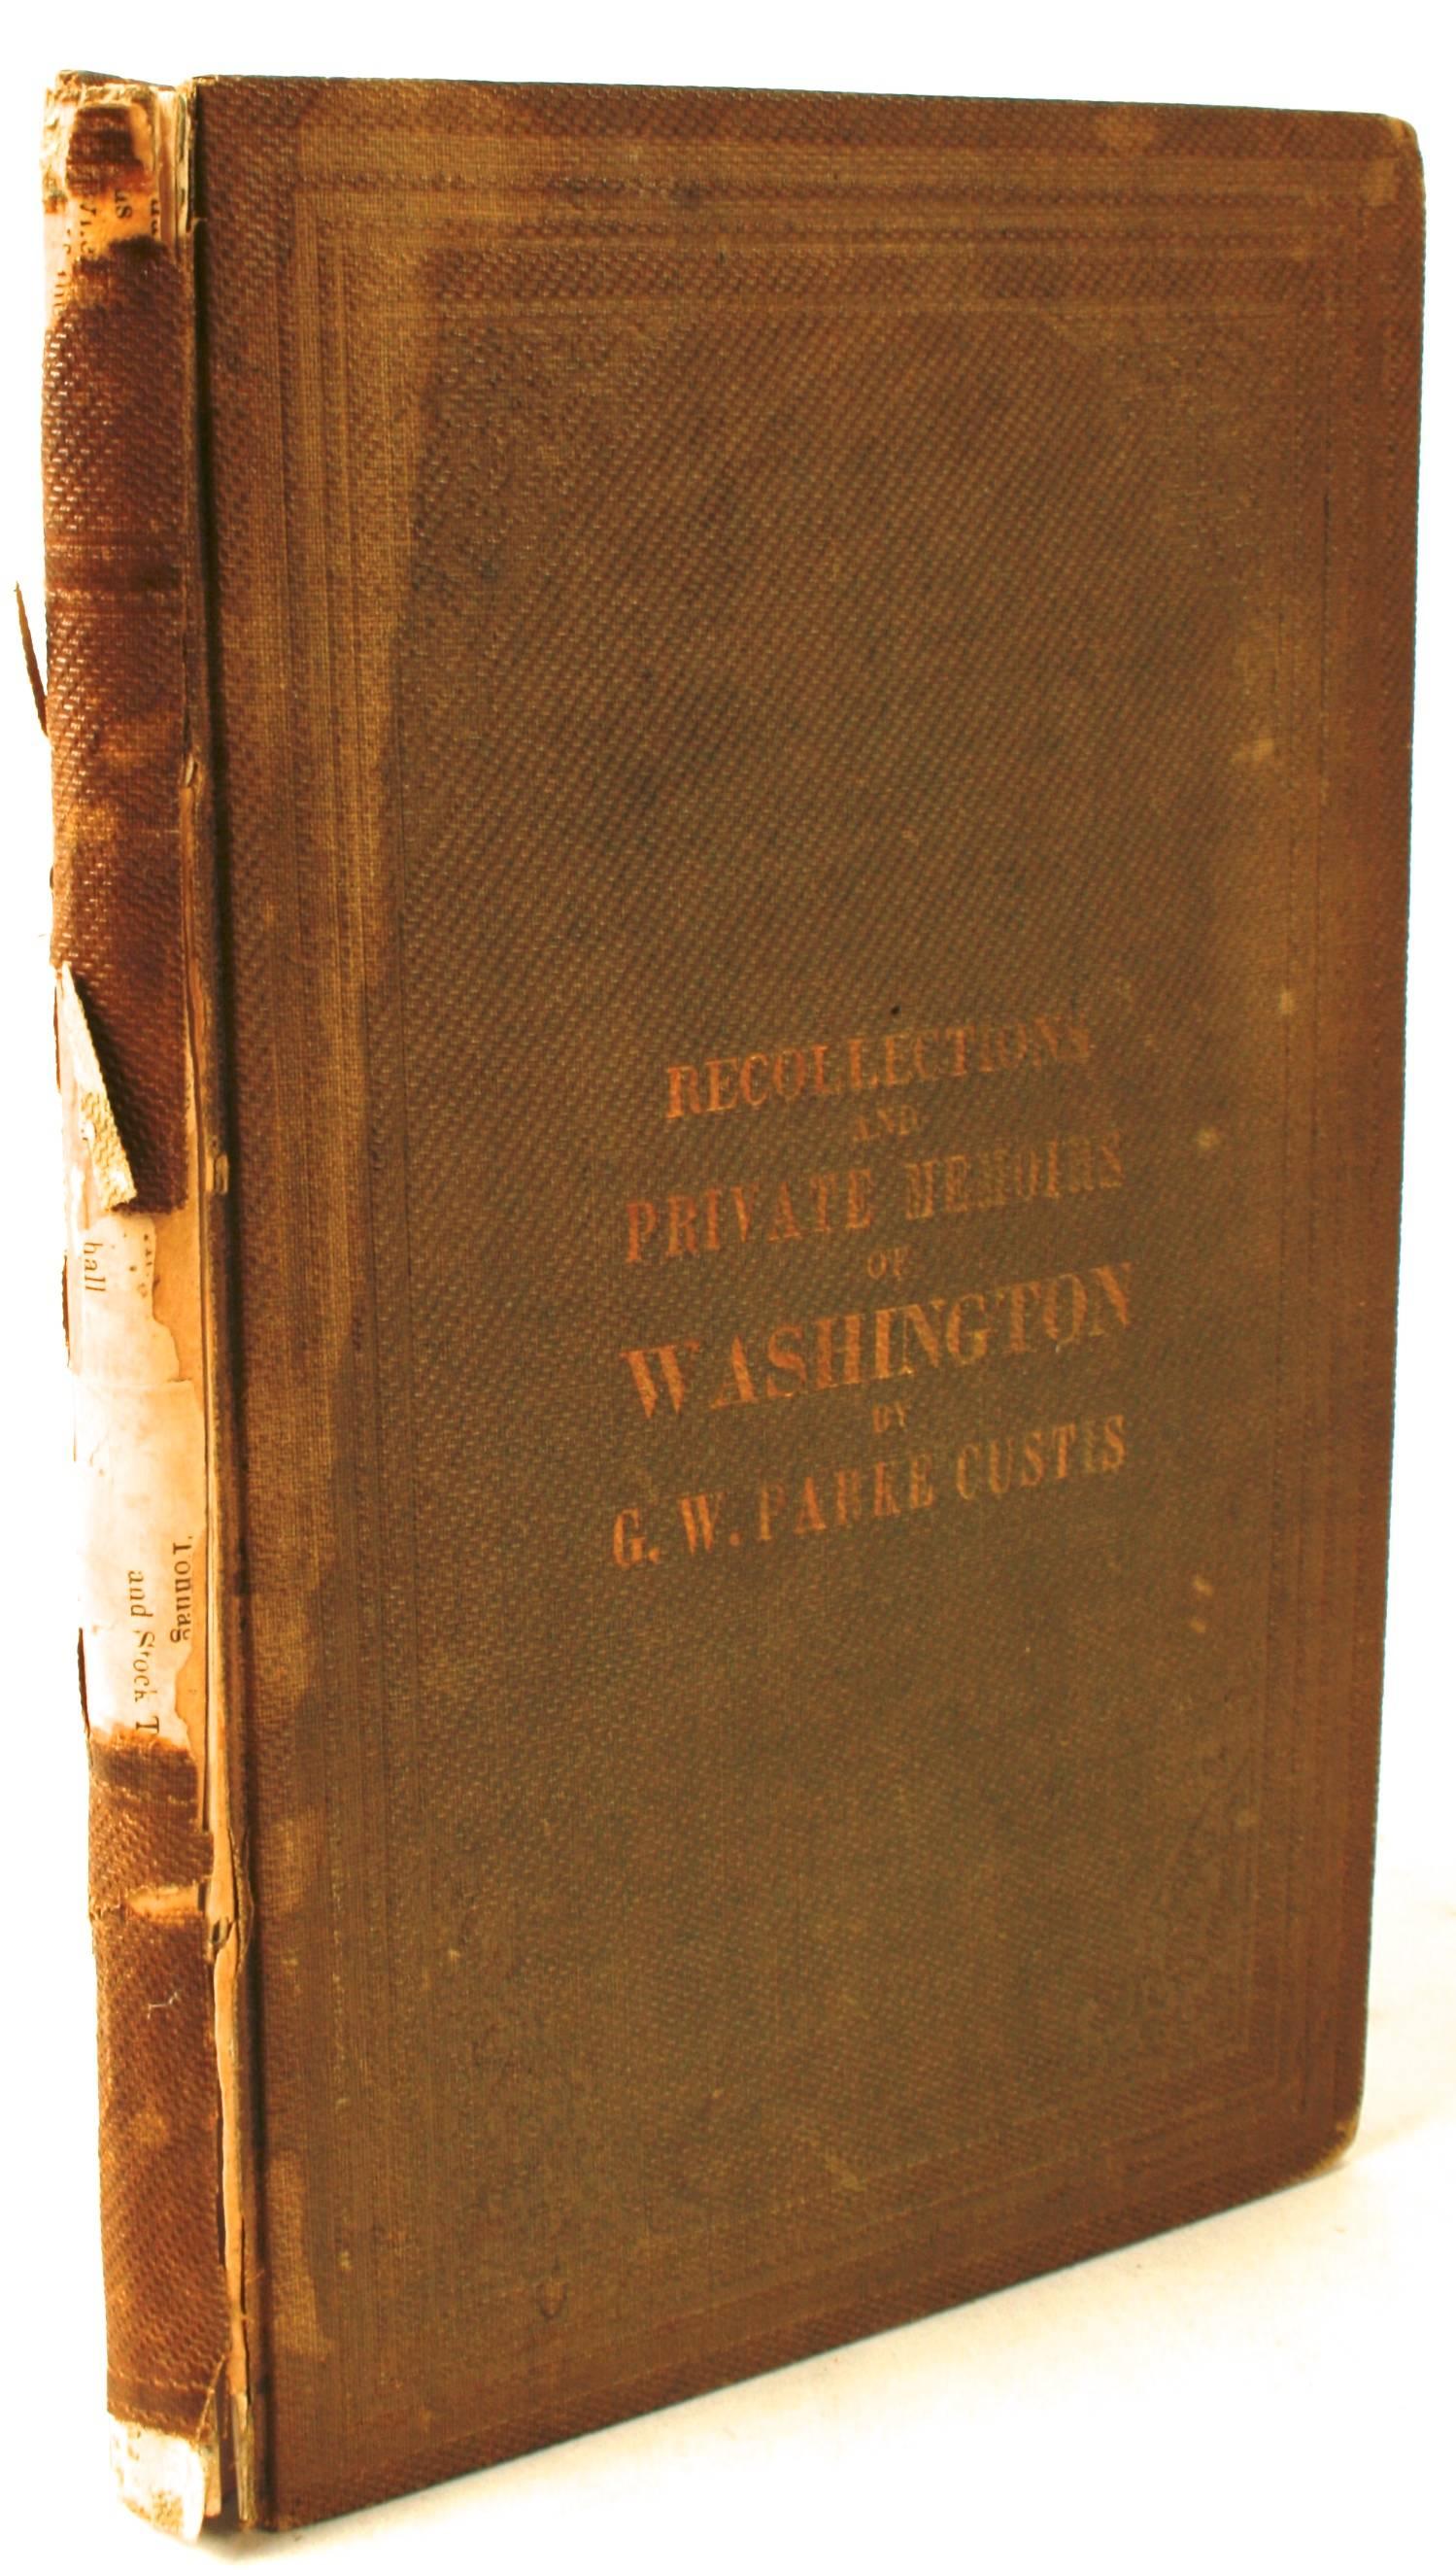 Recollections and Private Memoirs of Washington by G.W. Parks Custis. Washington D.C.: William H. Moore, 1859. First edition hardcover. 105 pp. A significant antique book written by George Washington's adopted son George Washington Parks Curtis who